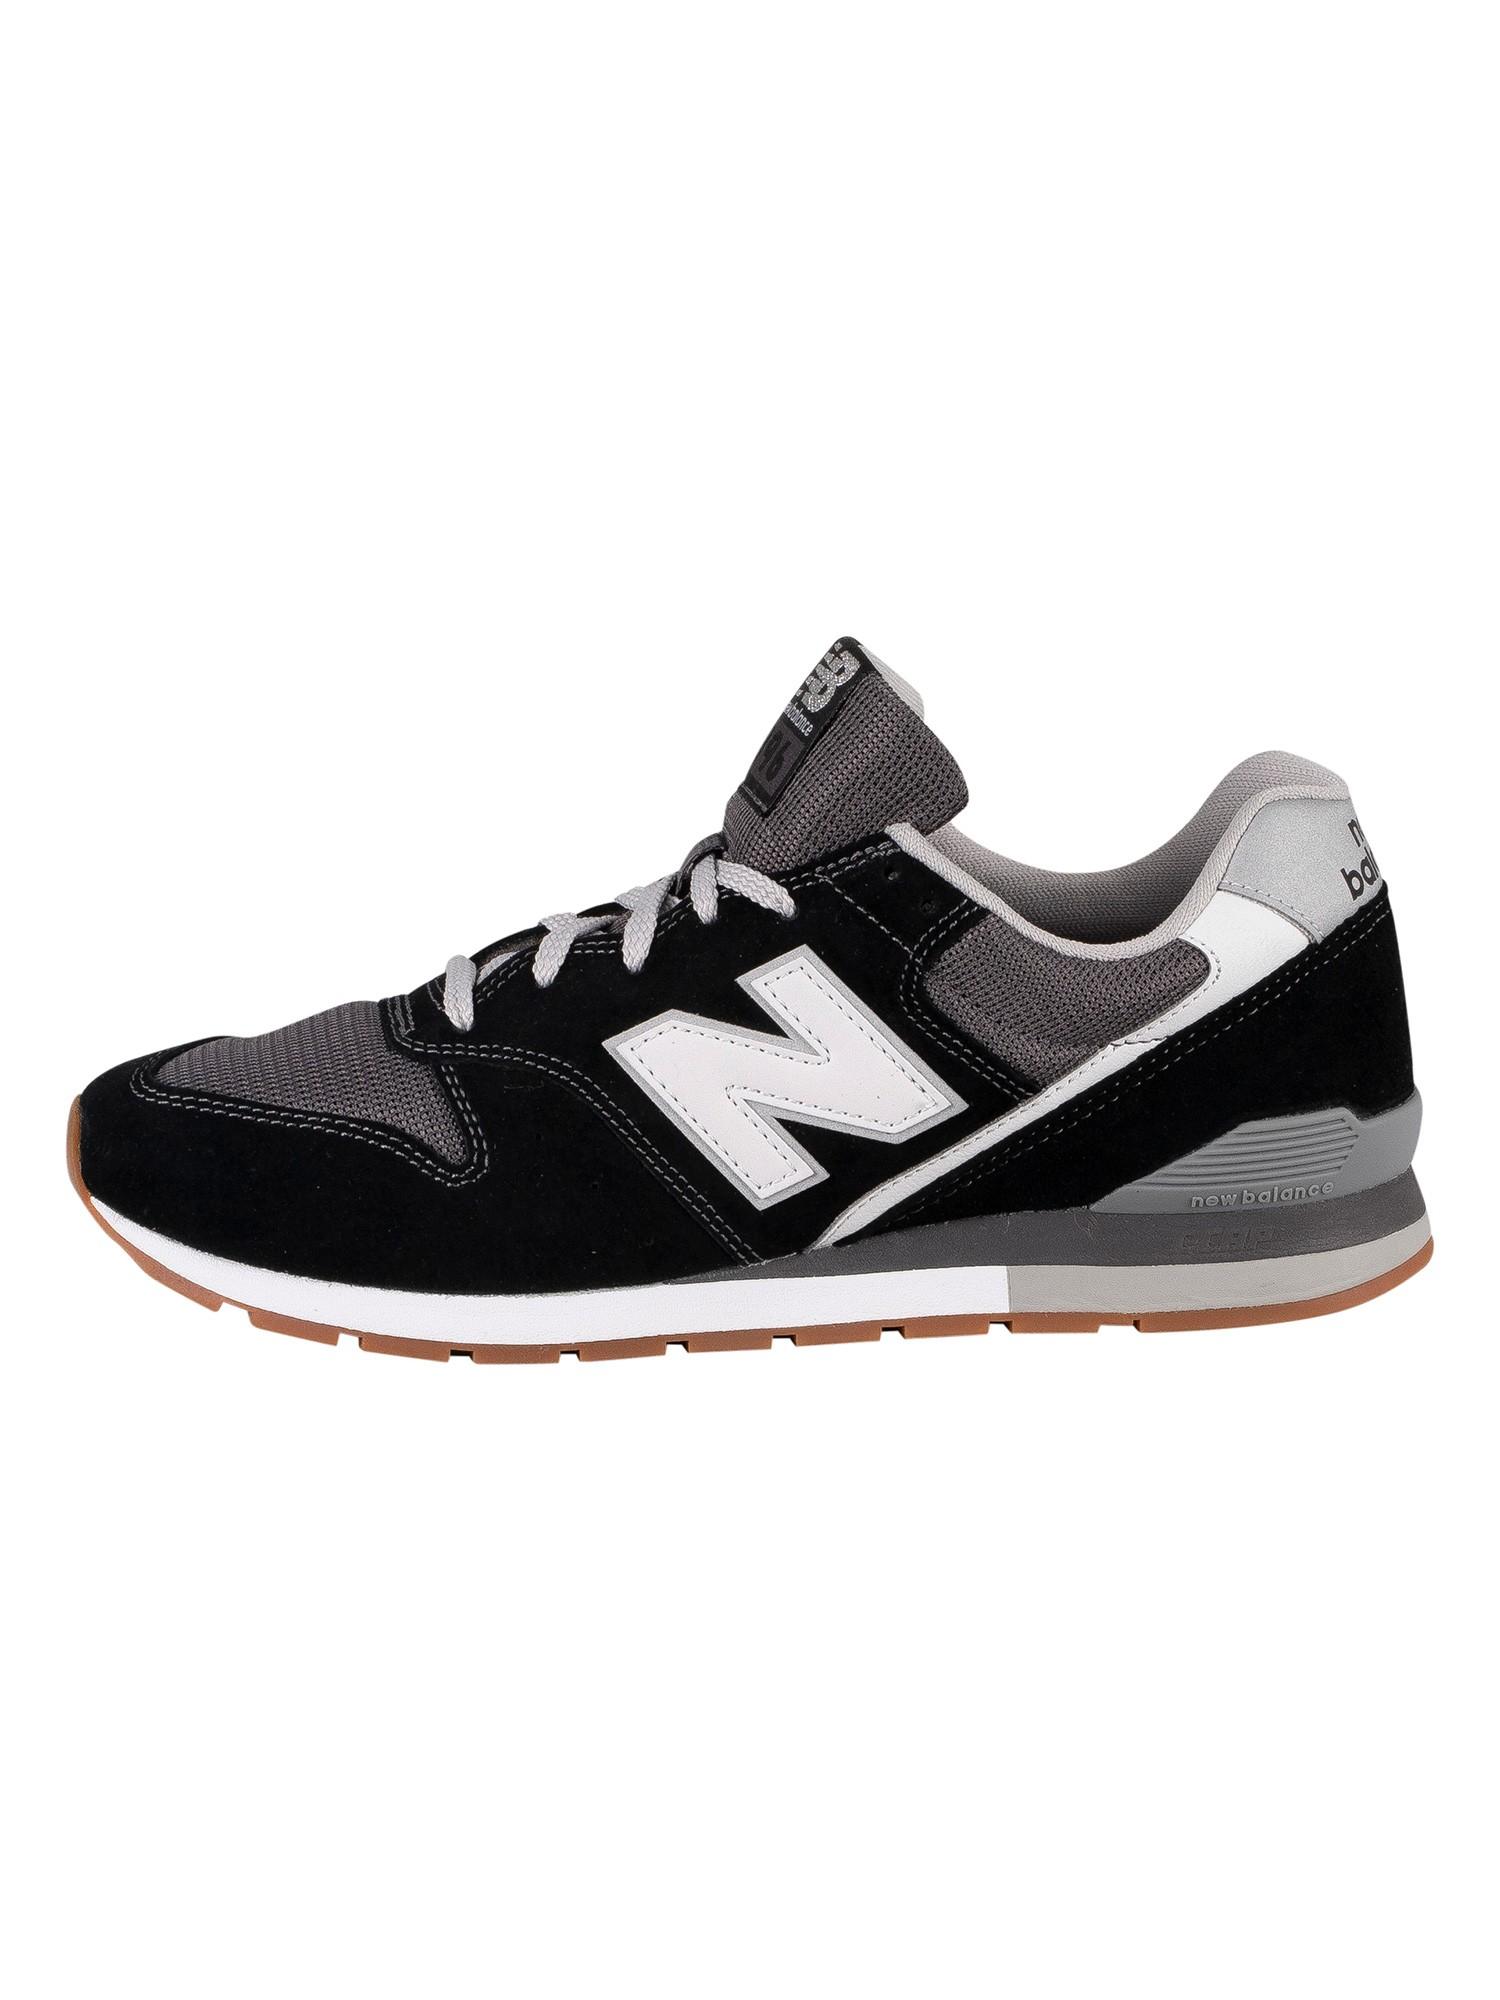 new balance 996 black suede trainers